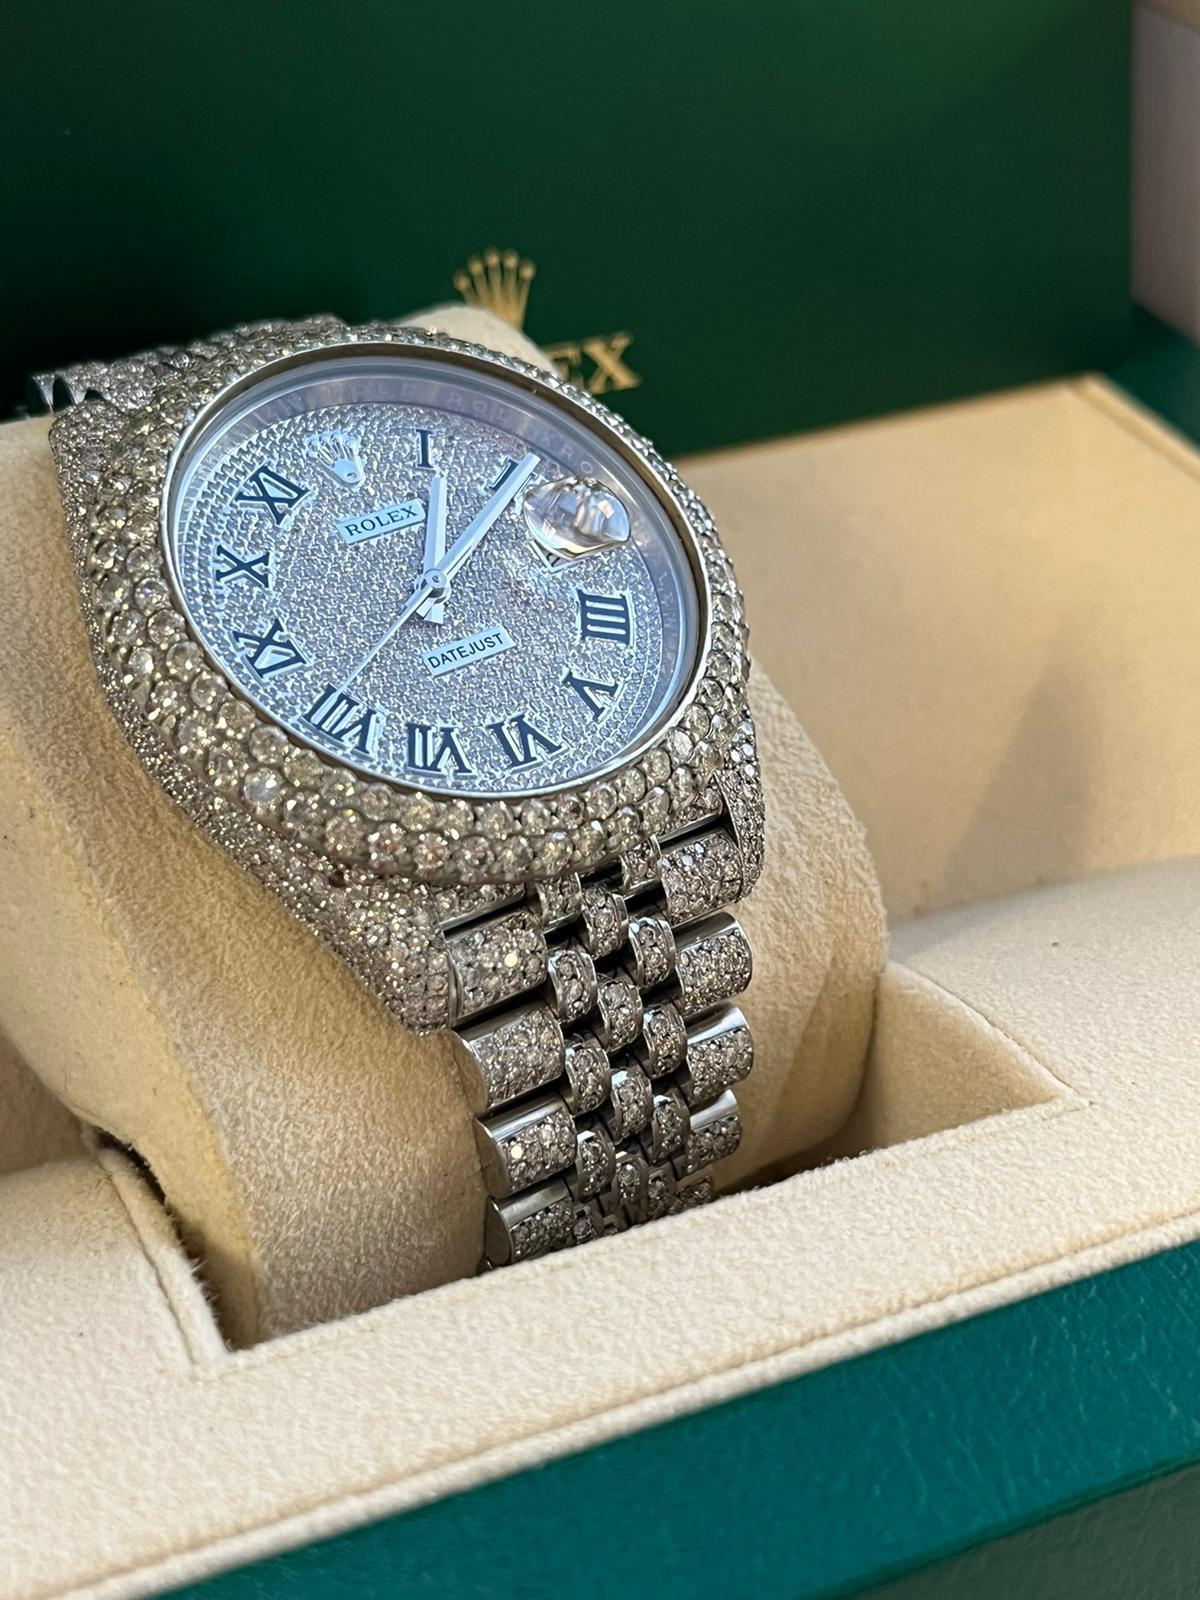 Rolex Datejust 41mm Iced Out Diamond Dial 14.75ct Jubilee Bracelet Watch 126300 For Sale 5